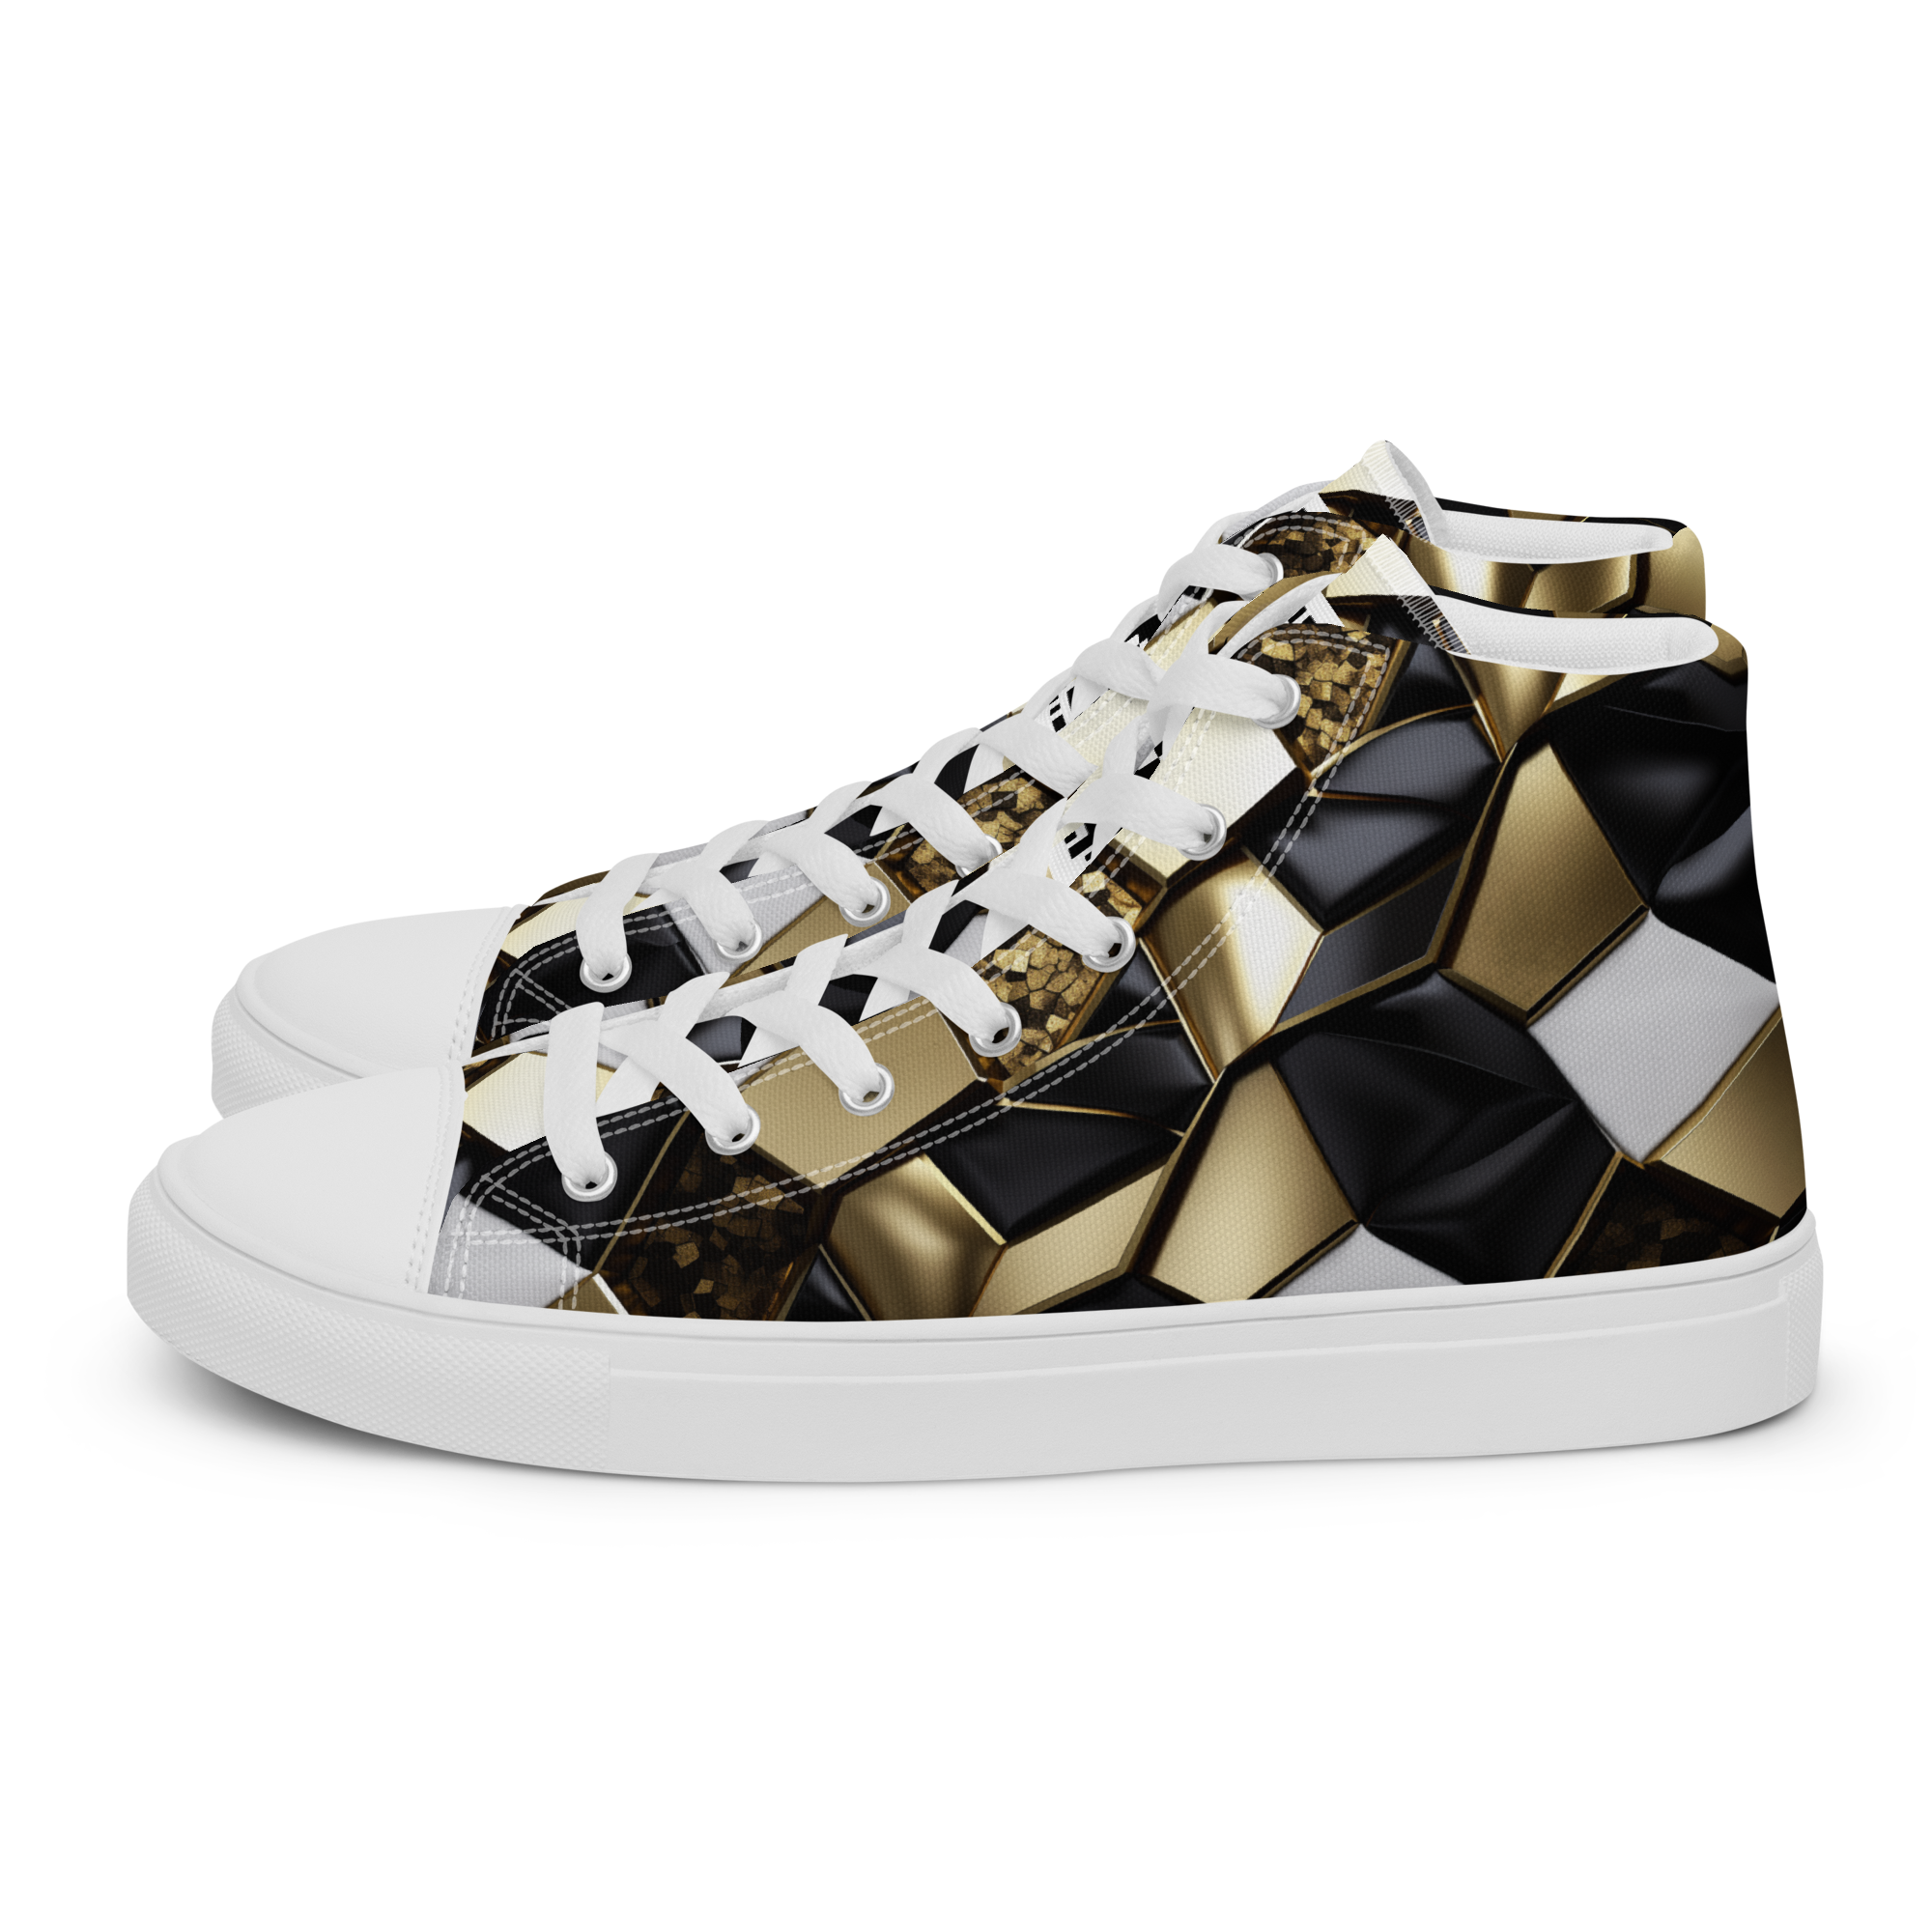 mens-high-top-canvas-shoes-white-left-653713da37cd7.png